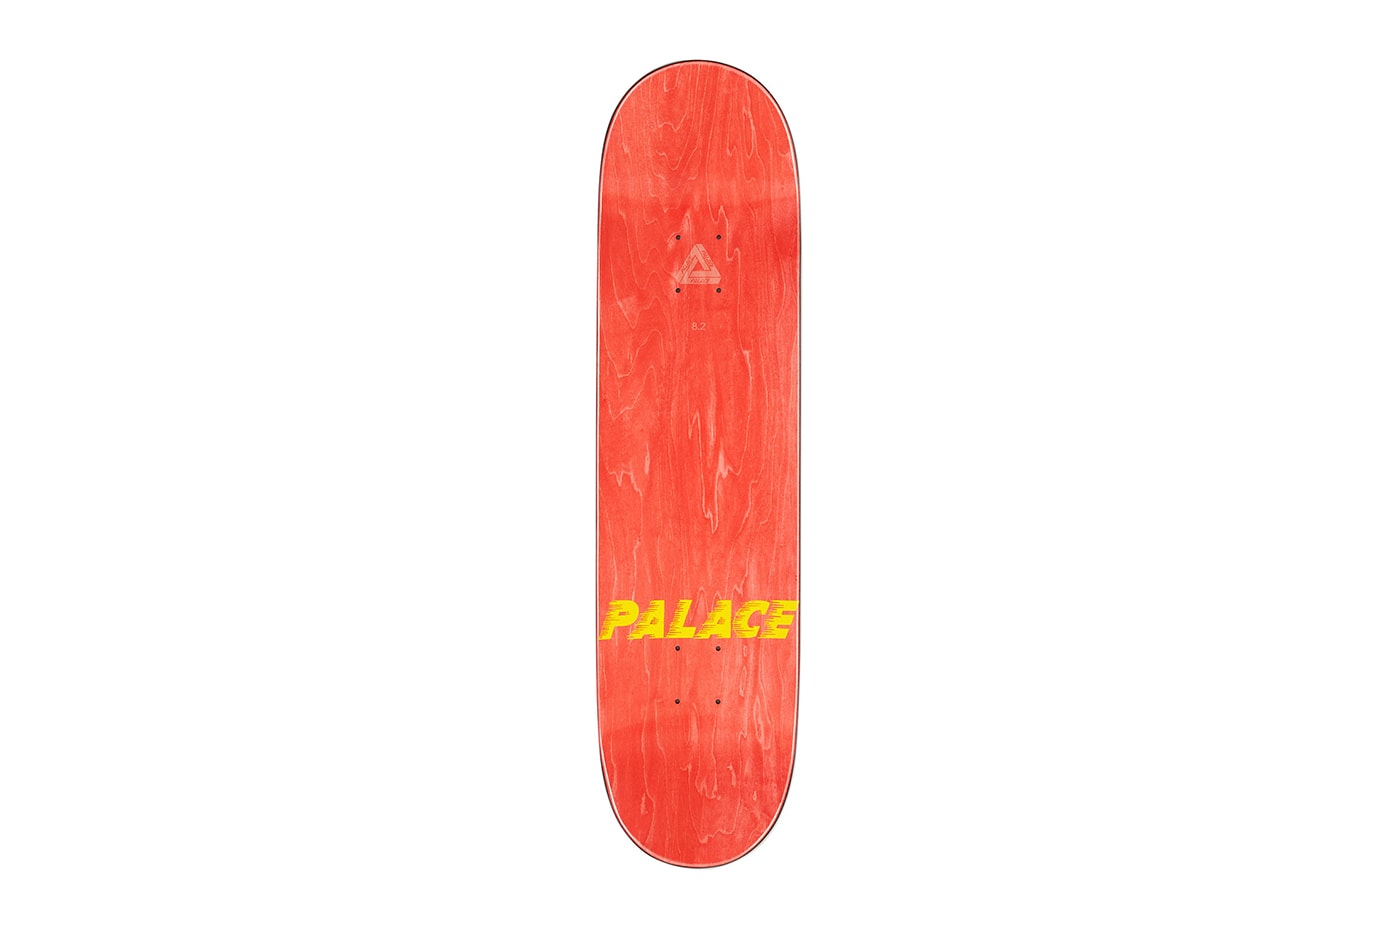 Palace Fall 2020 Accessories Skatedecks and Bags Release Info Date Buy Price egg mold skate tool bags necklace 